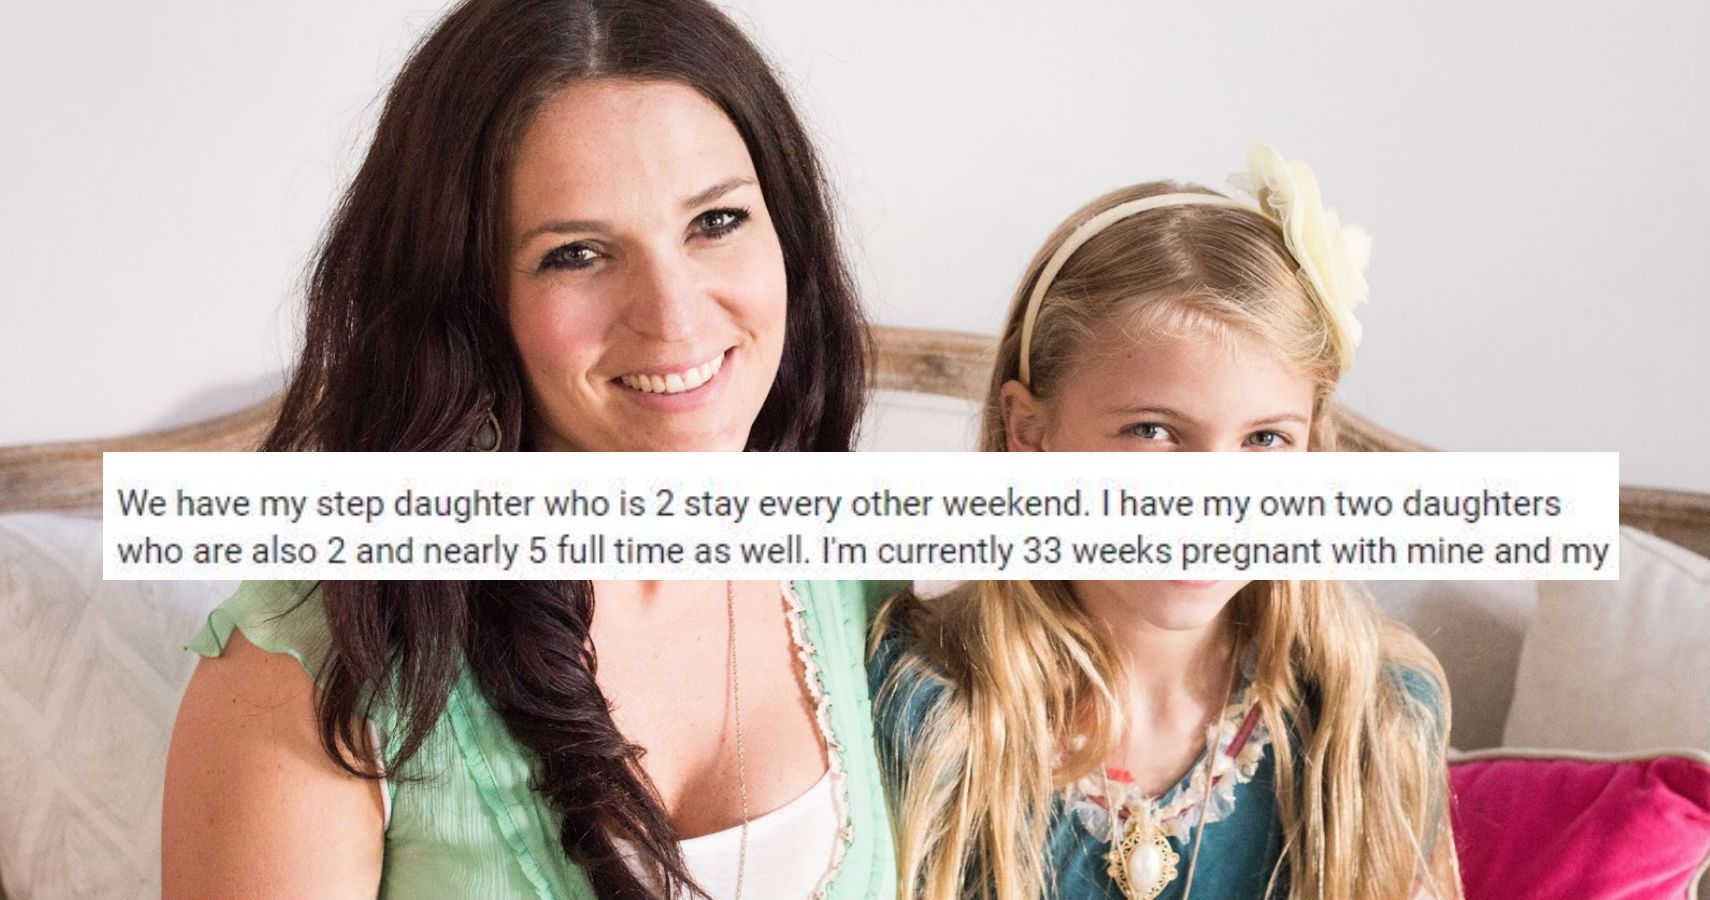 Mom Stops Stepdaughters Weekly Visits Because She Feels Its Too ‘hectic